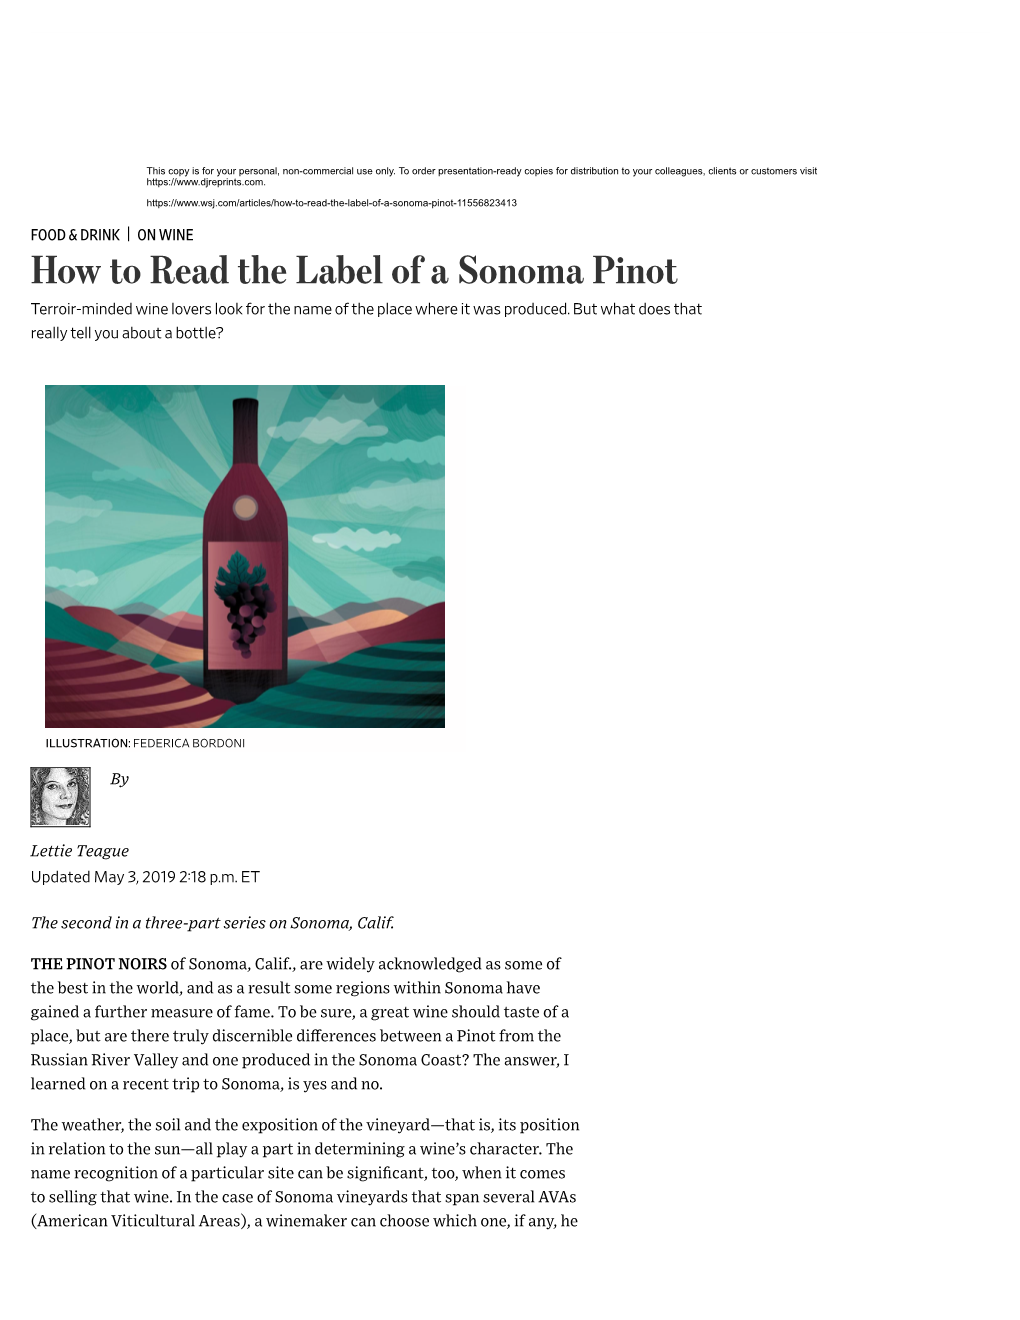 How to Read the Label of a Sonoma Pinot Terroir-Minded Wine Lovers Look for the Name of the Place Where It Was Produced